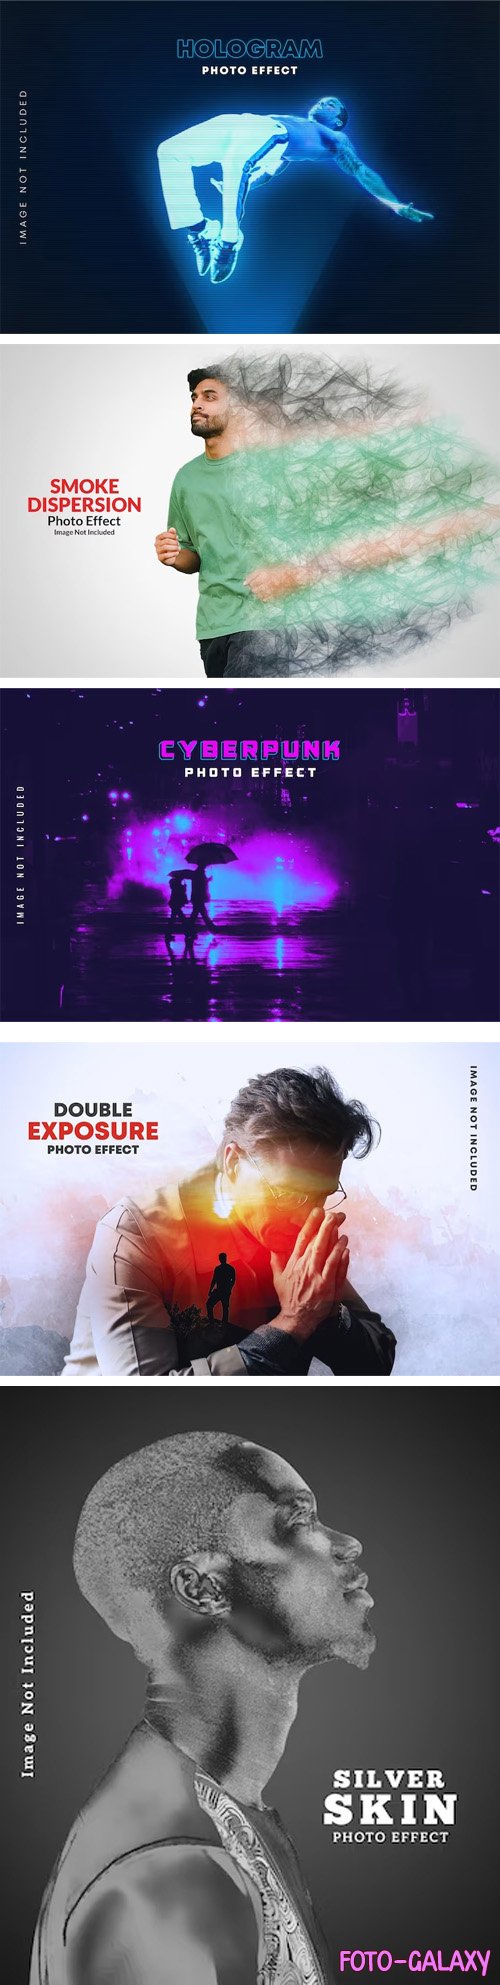 Awesome Premium Photo Effects for Photoshop [Vol.8]